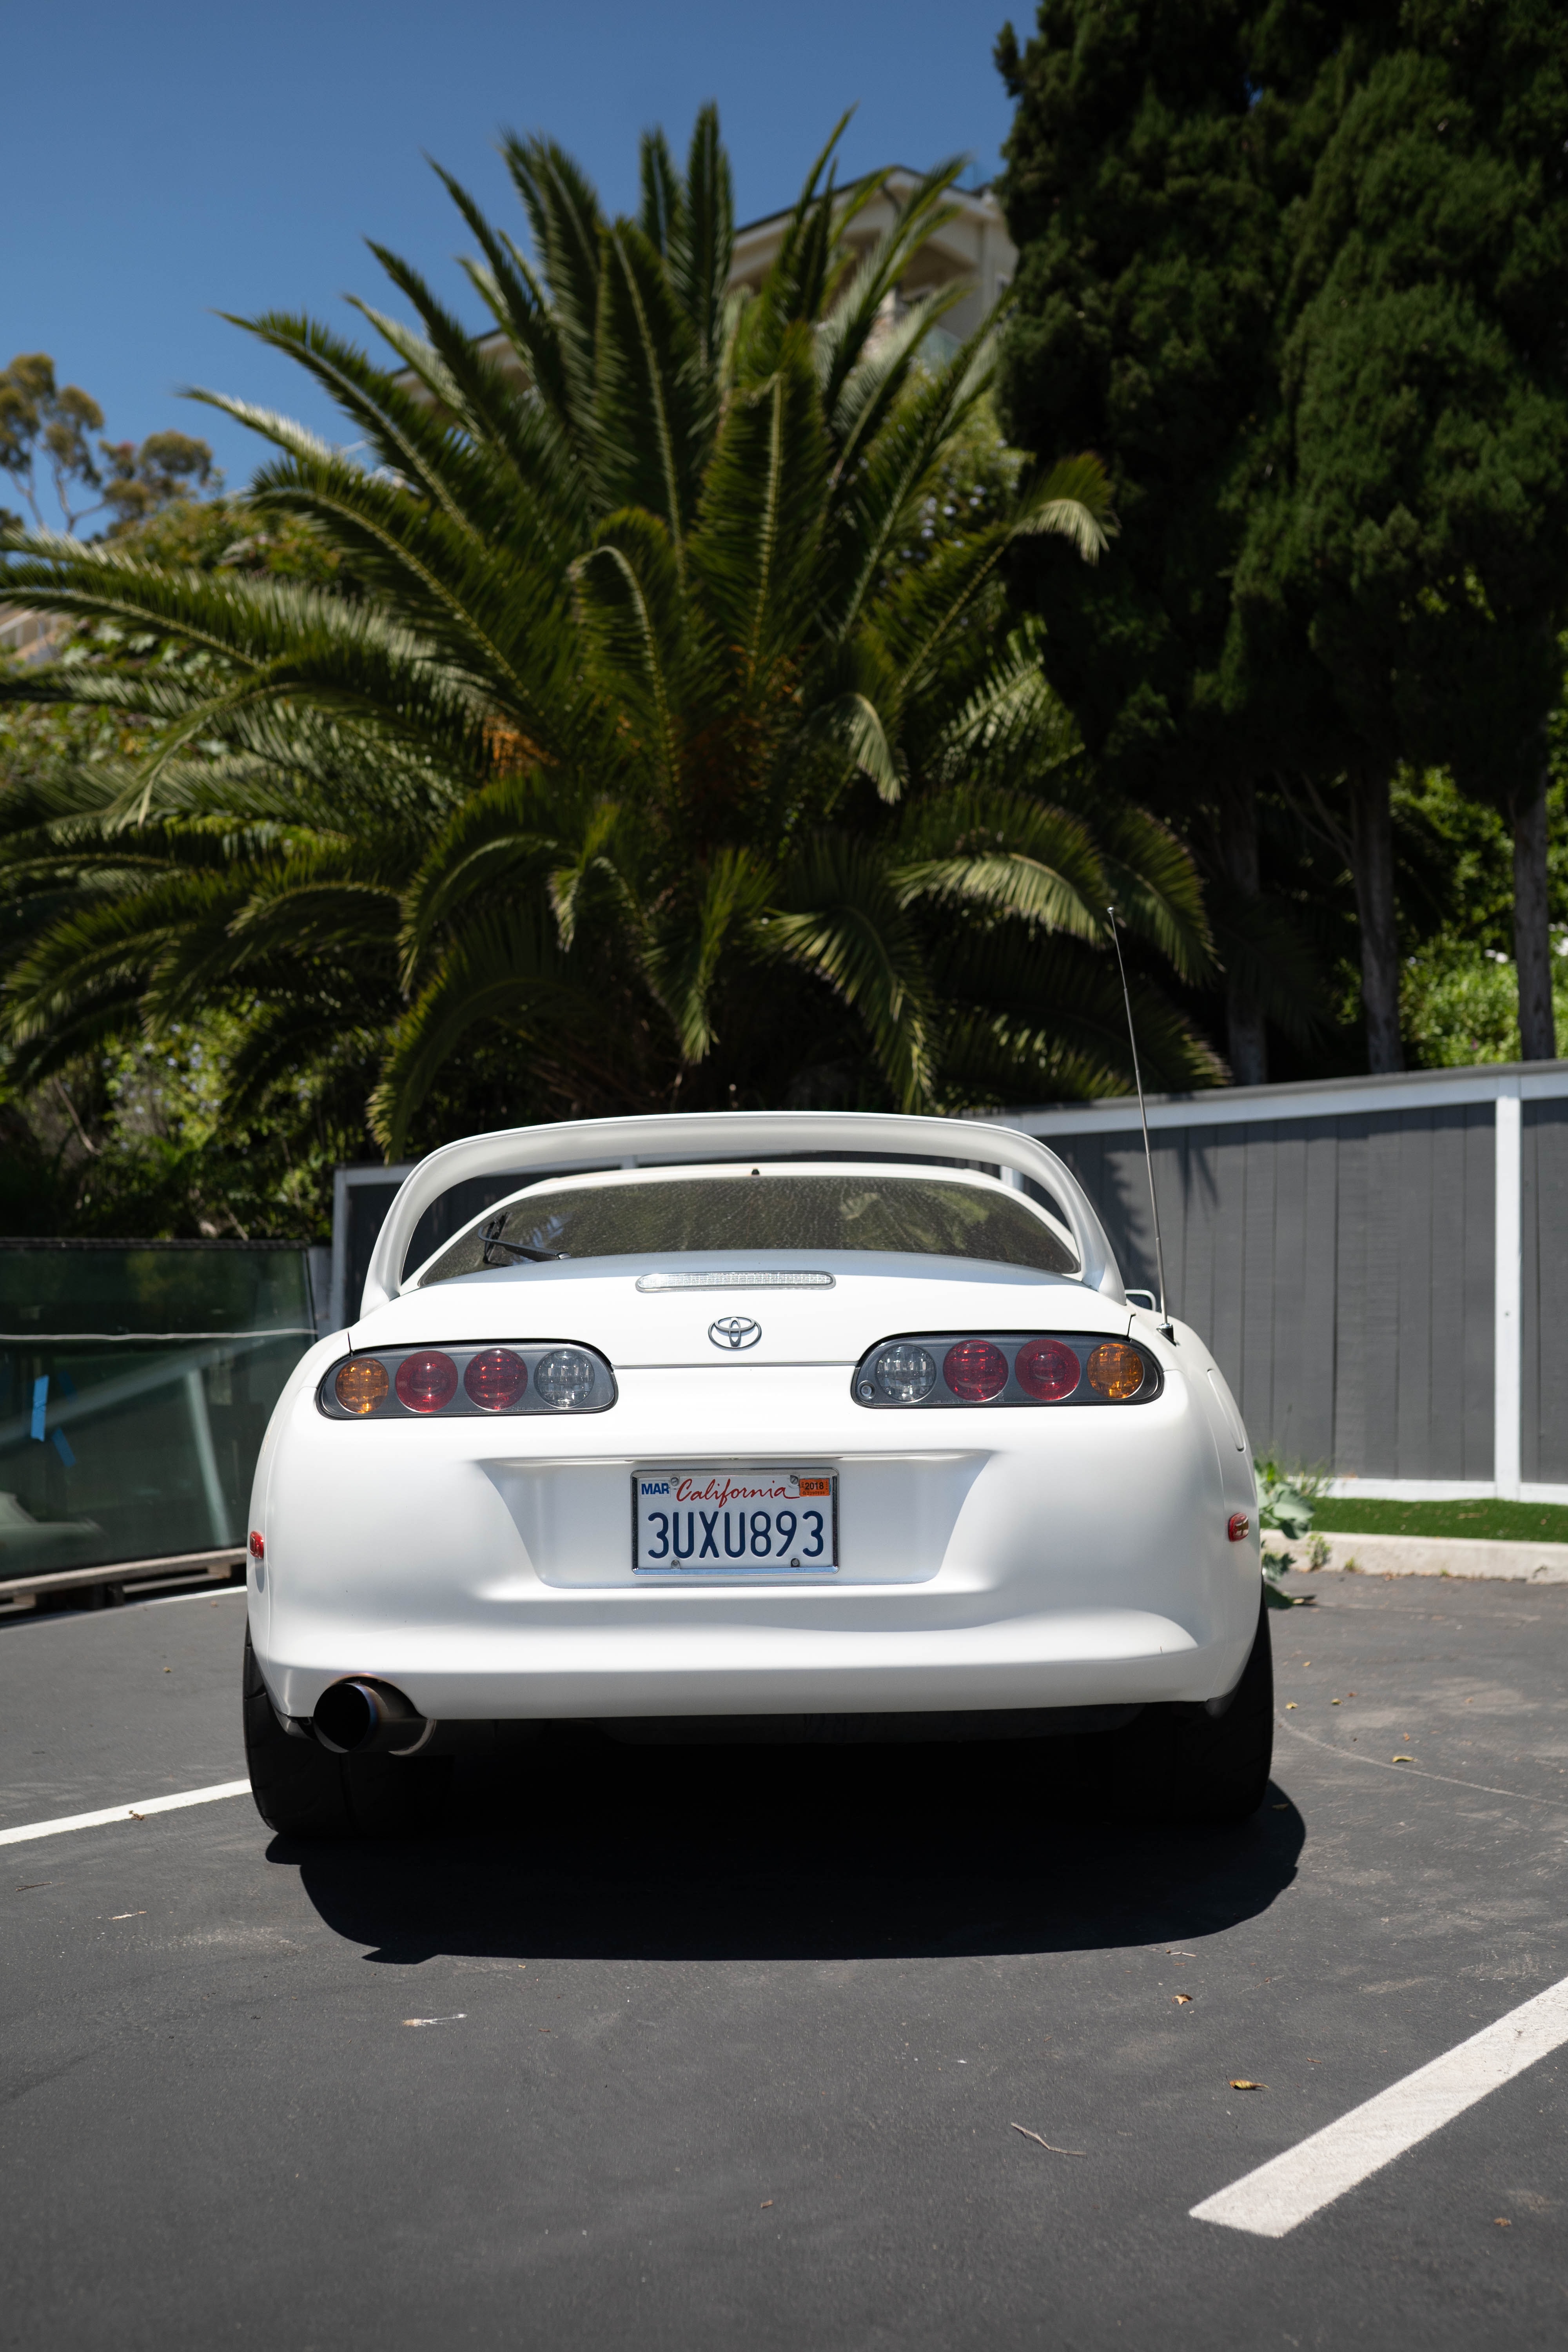 Download background sports, toyota, cars, white, car, sports car, back view, rear view